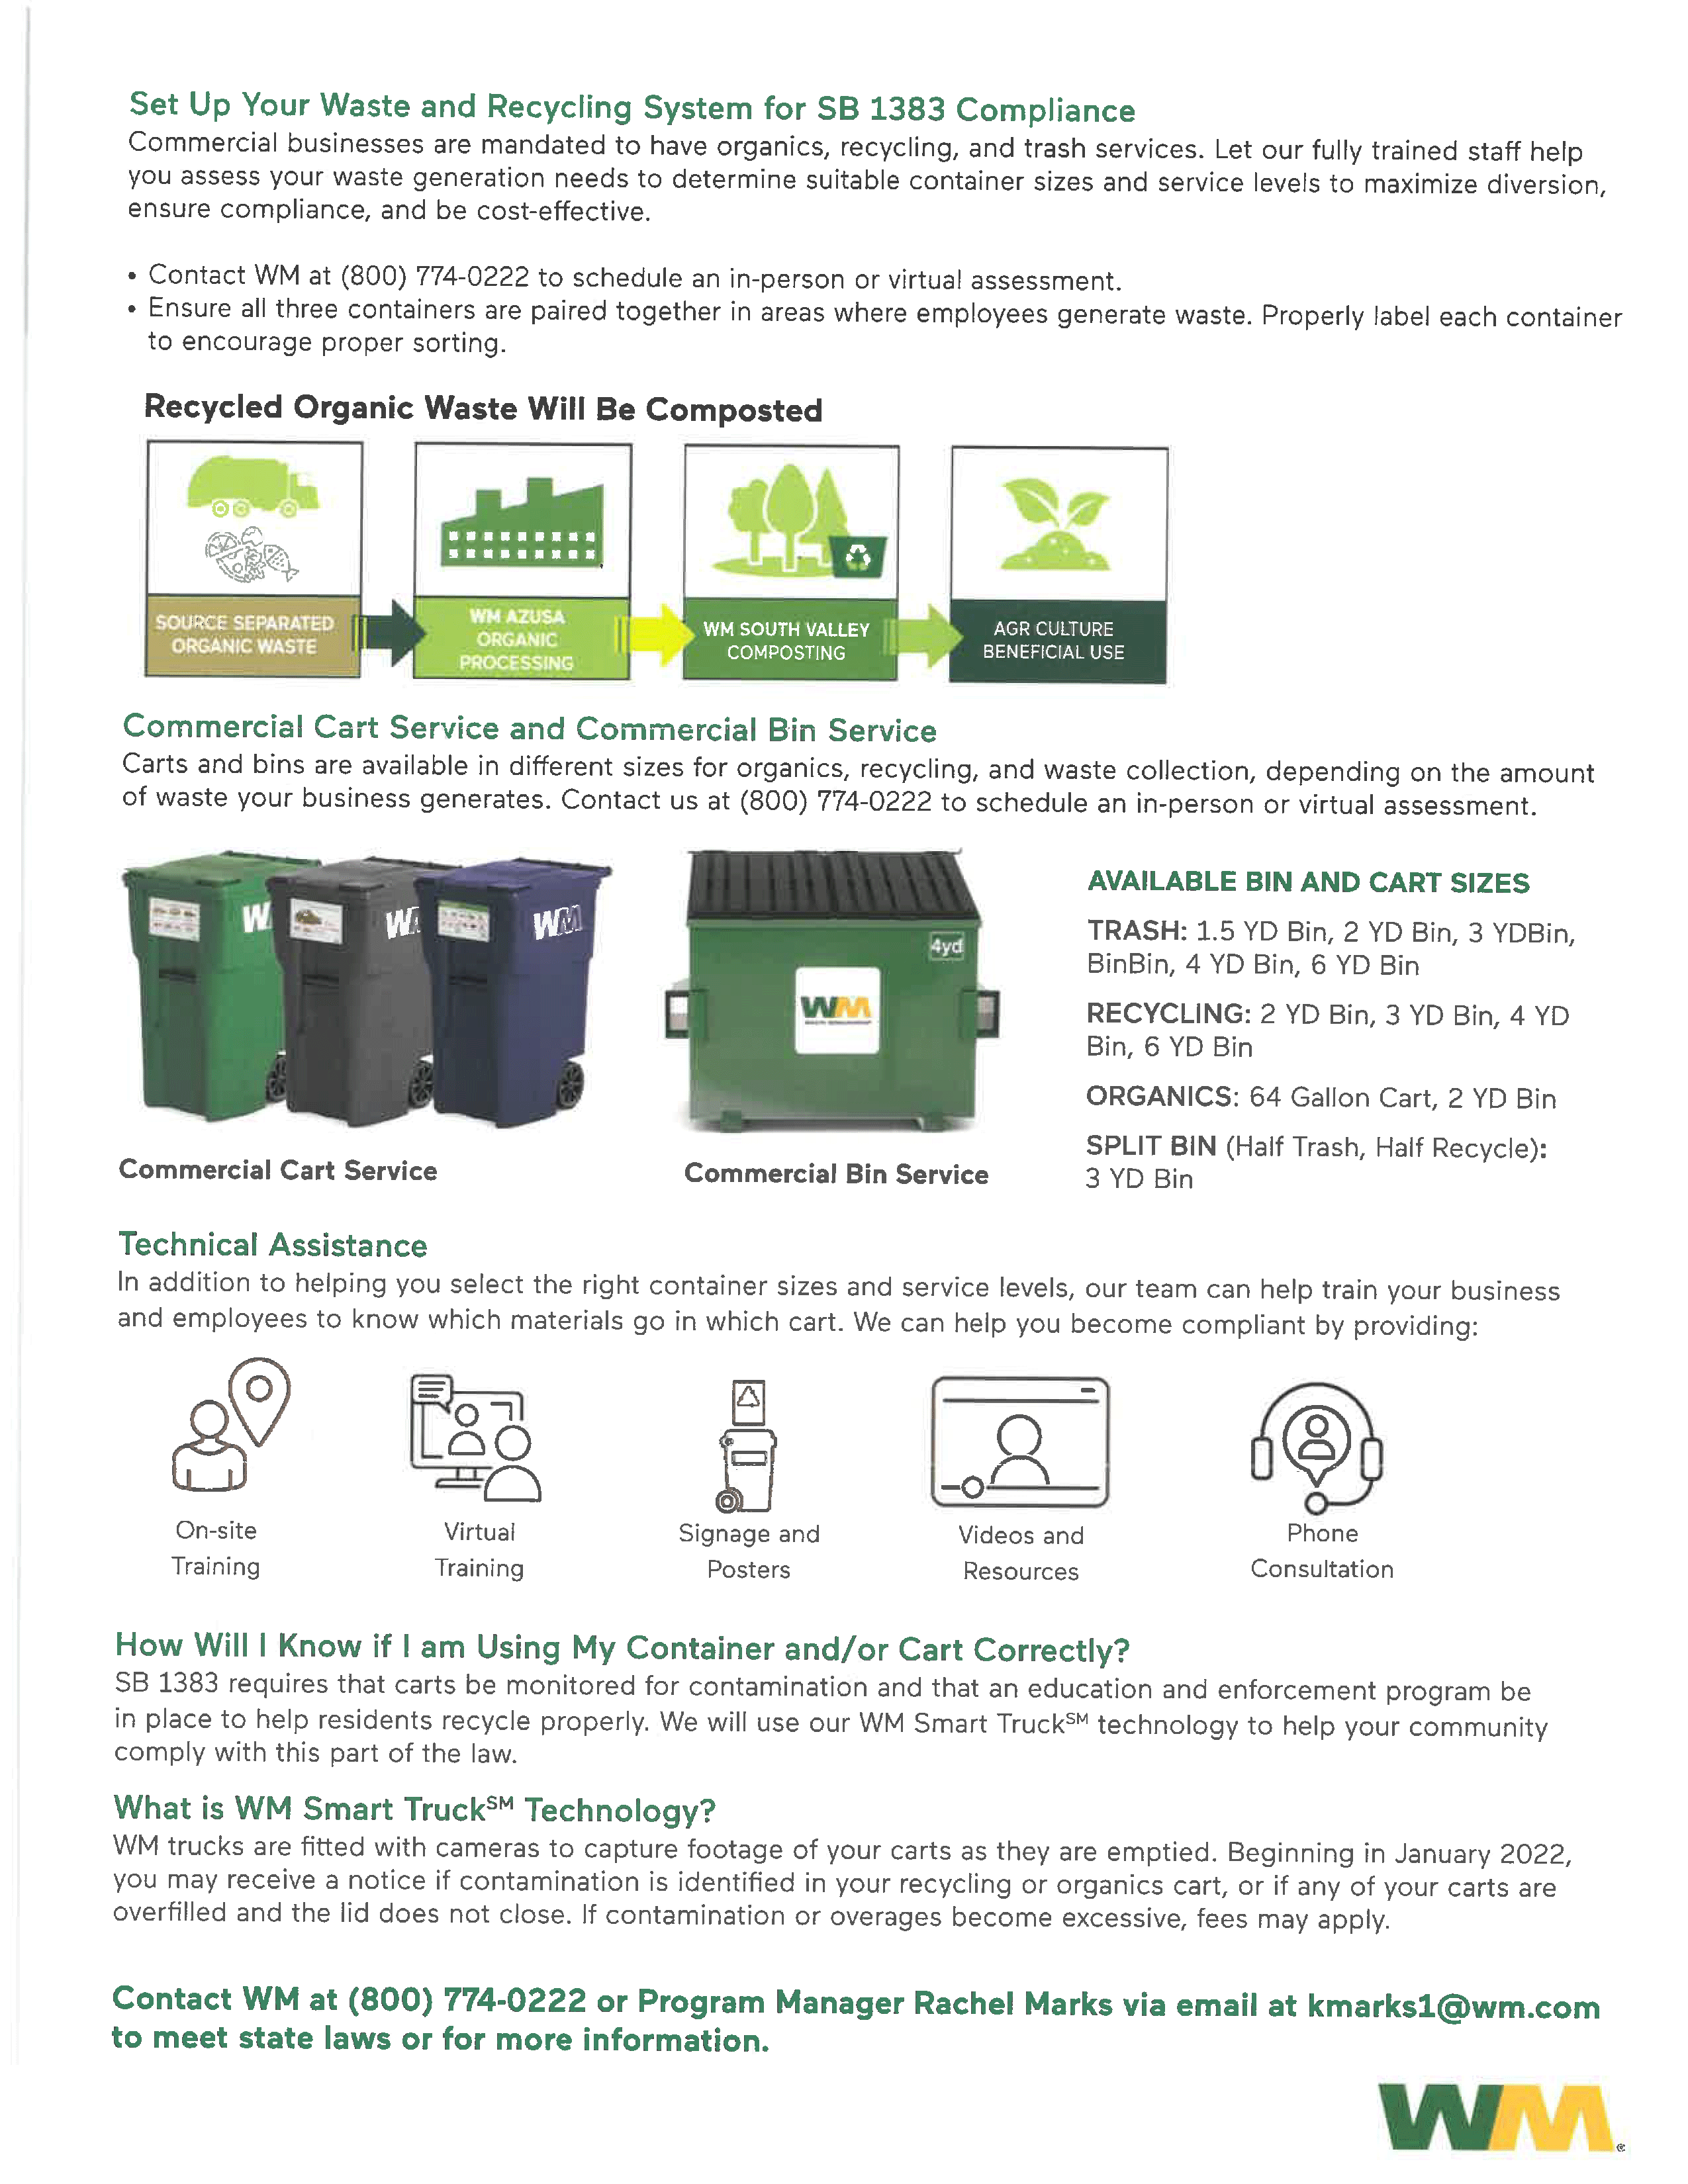 Mandatory Organics Recycling Collection Program information for the City of Arcadia 